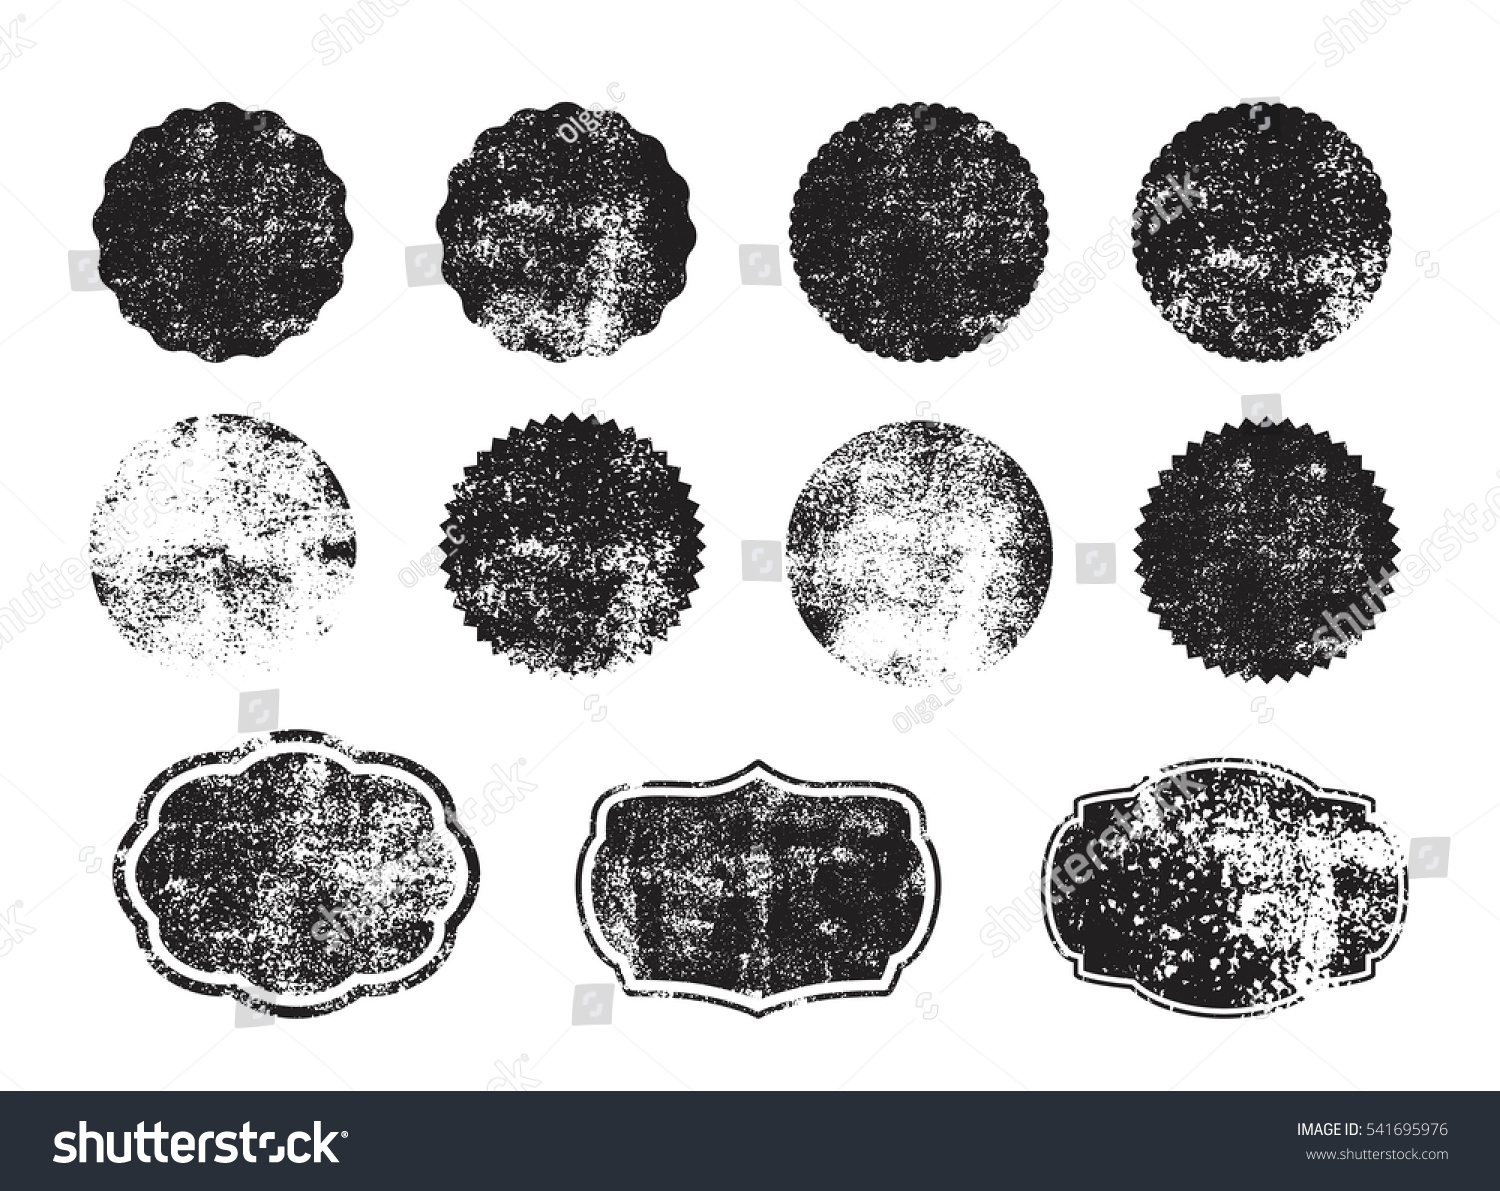 Collection of grunge circle shapes. Design elements for logo, branding, label. Old, dirty forms, frames. #541695976